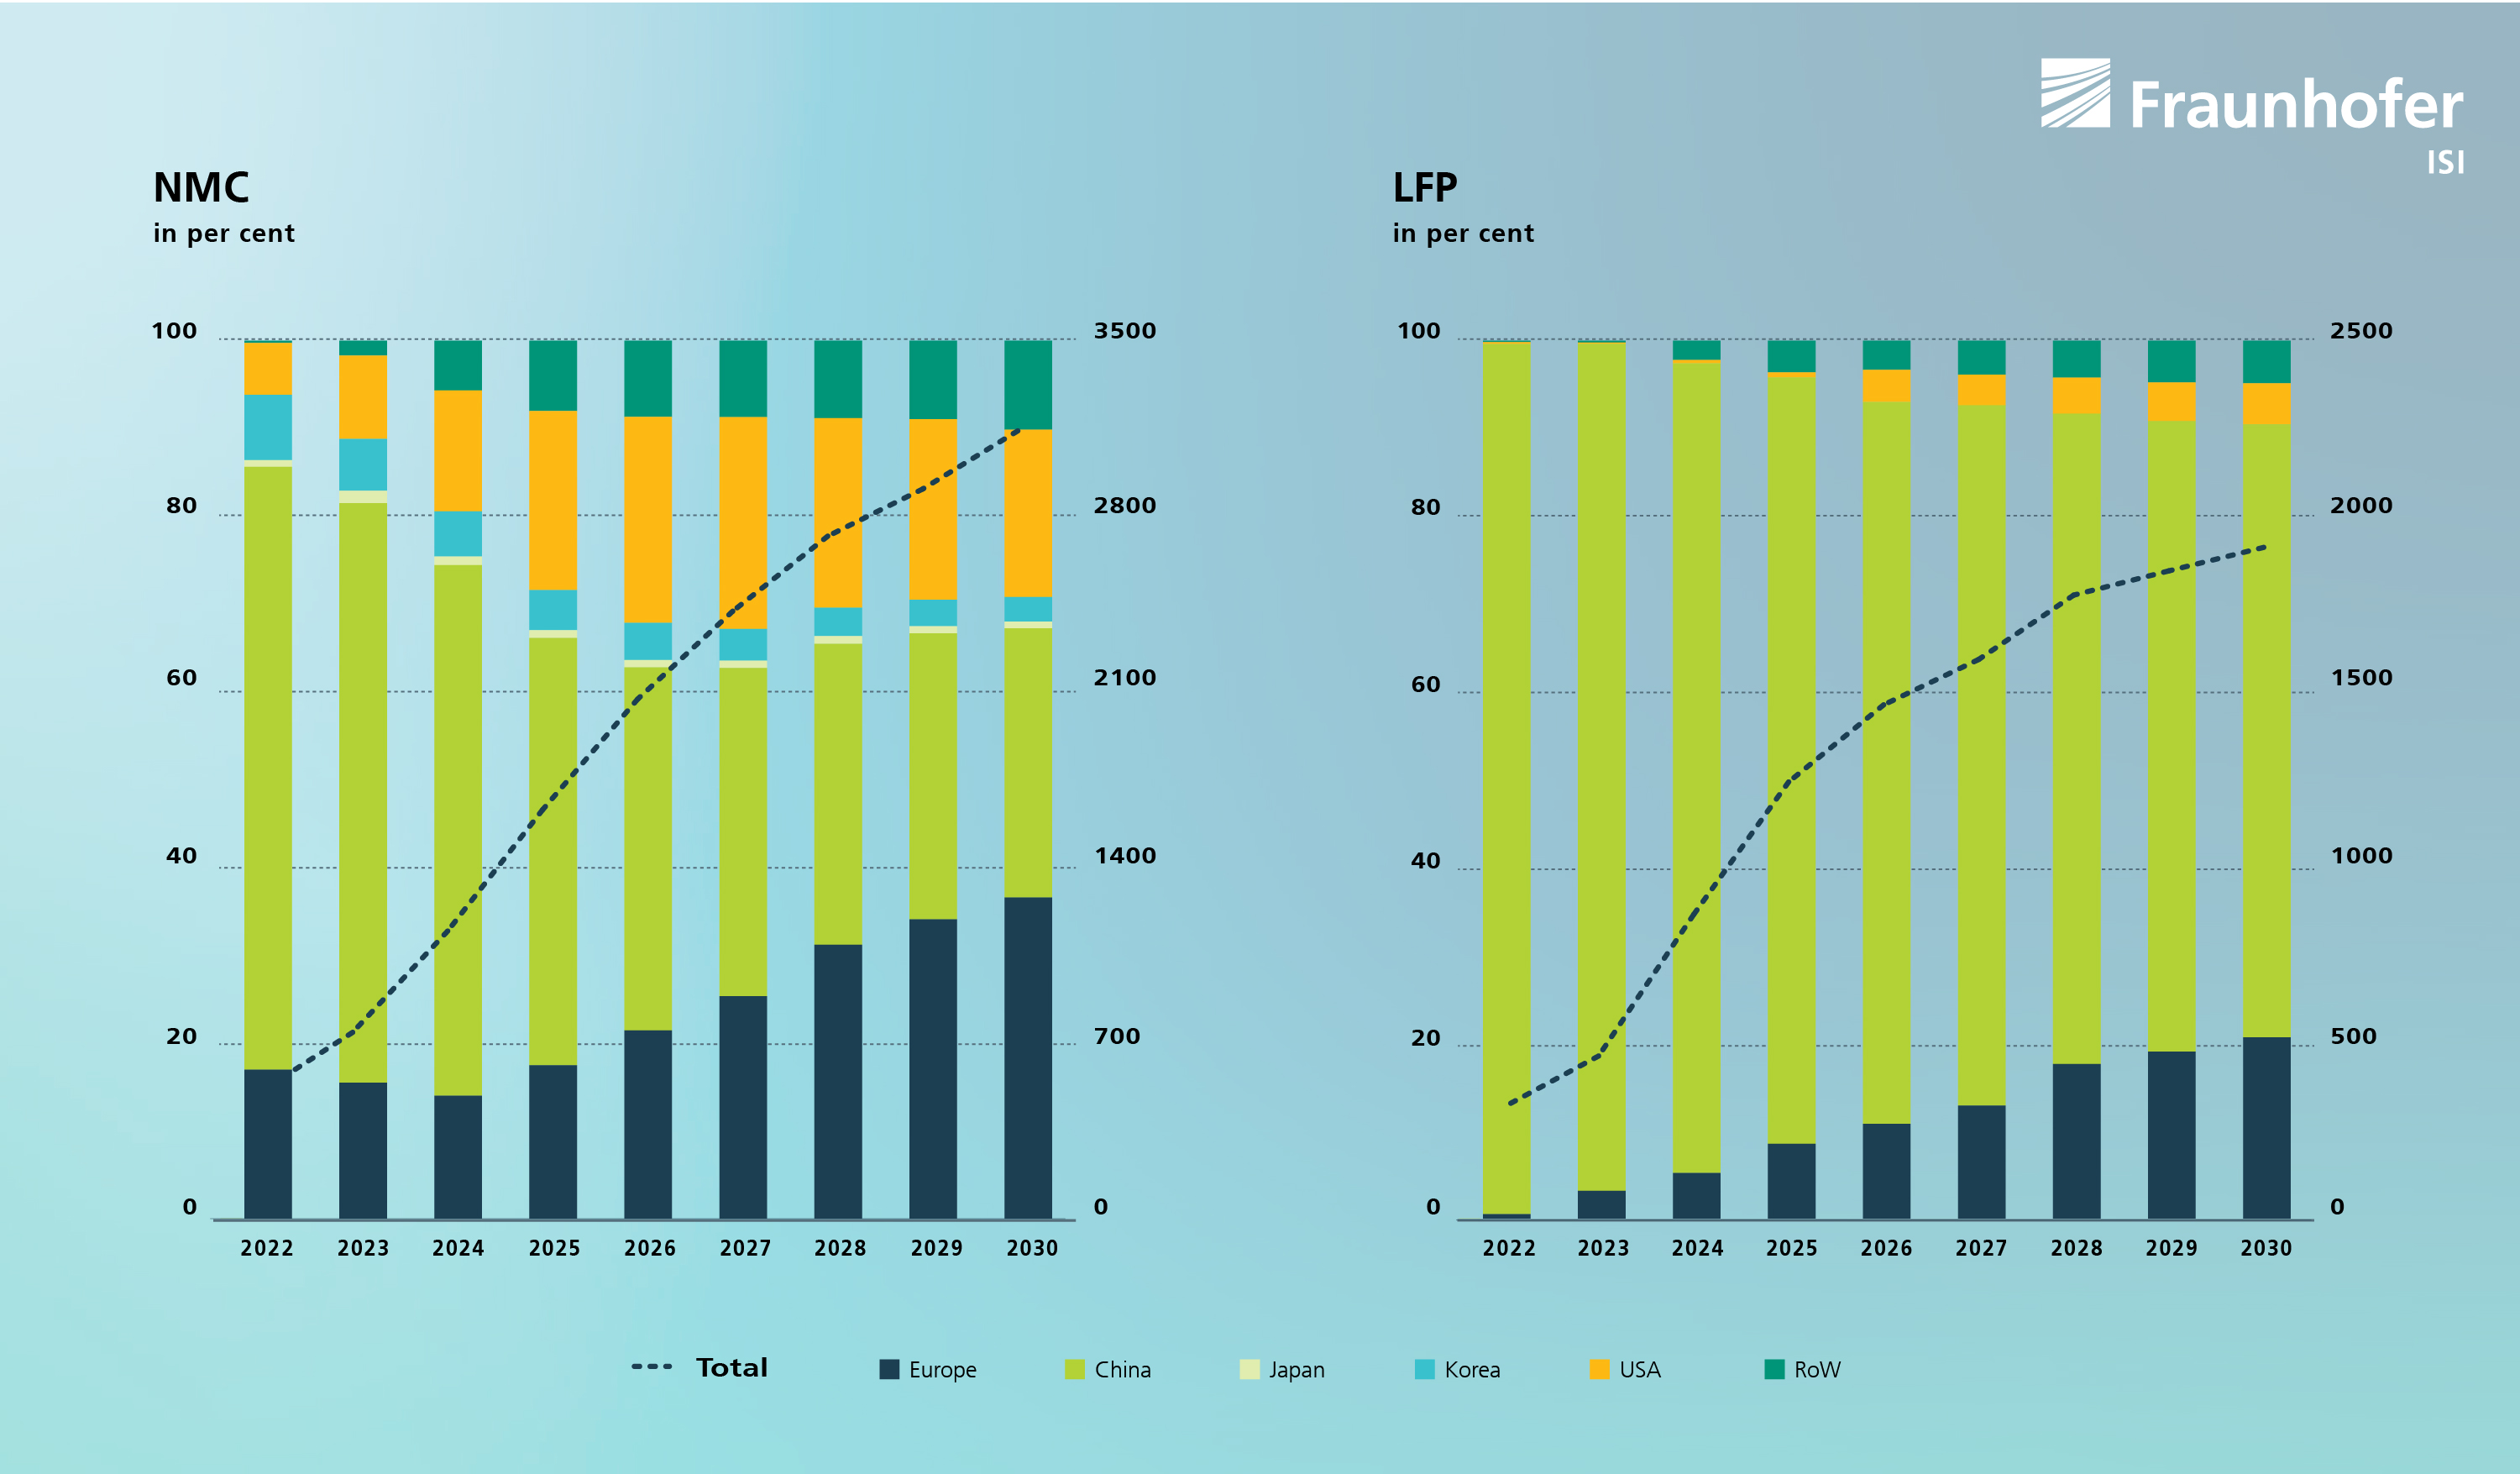 Production of NMC and LFP cathode materials in different countries until 2030, in per cent